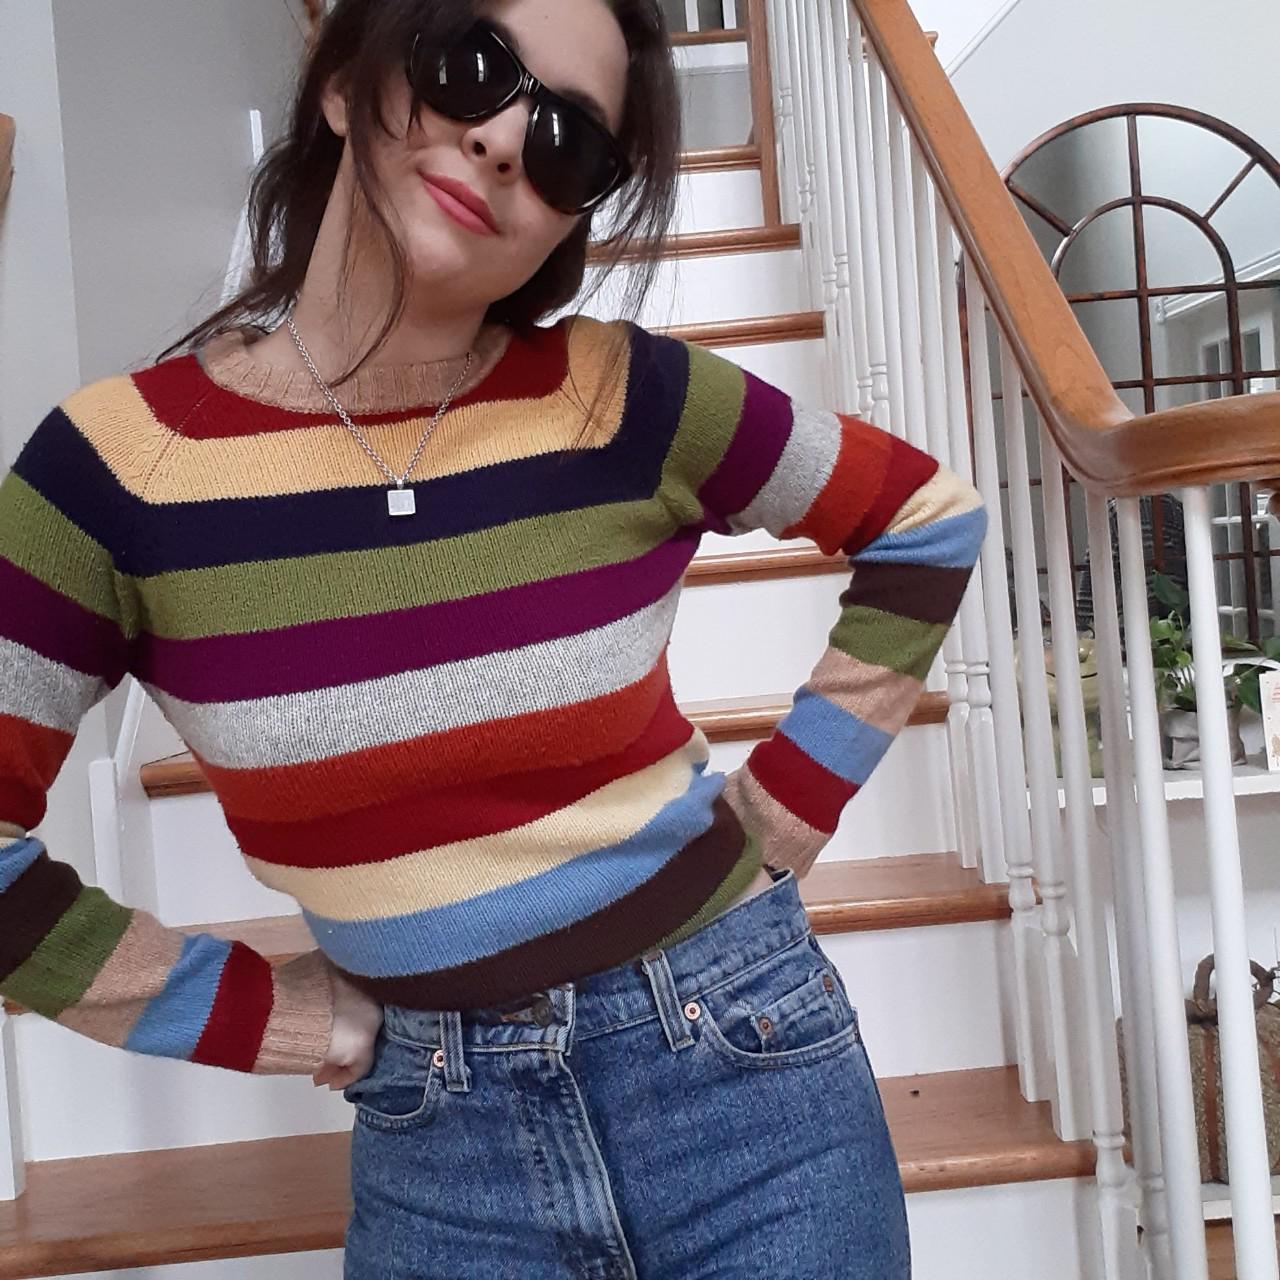 Product Image 2 - Colorful stripe sweater 
This sweater